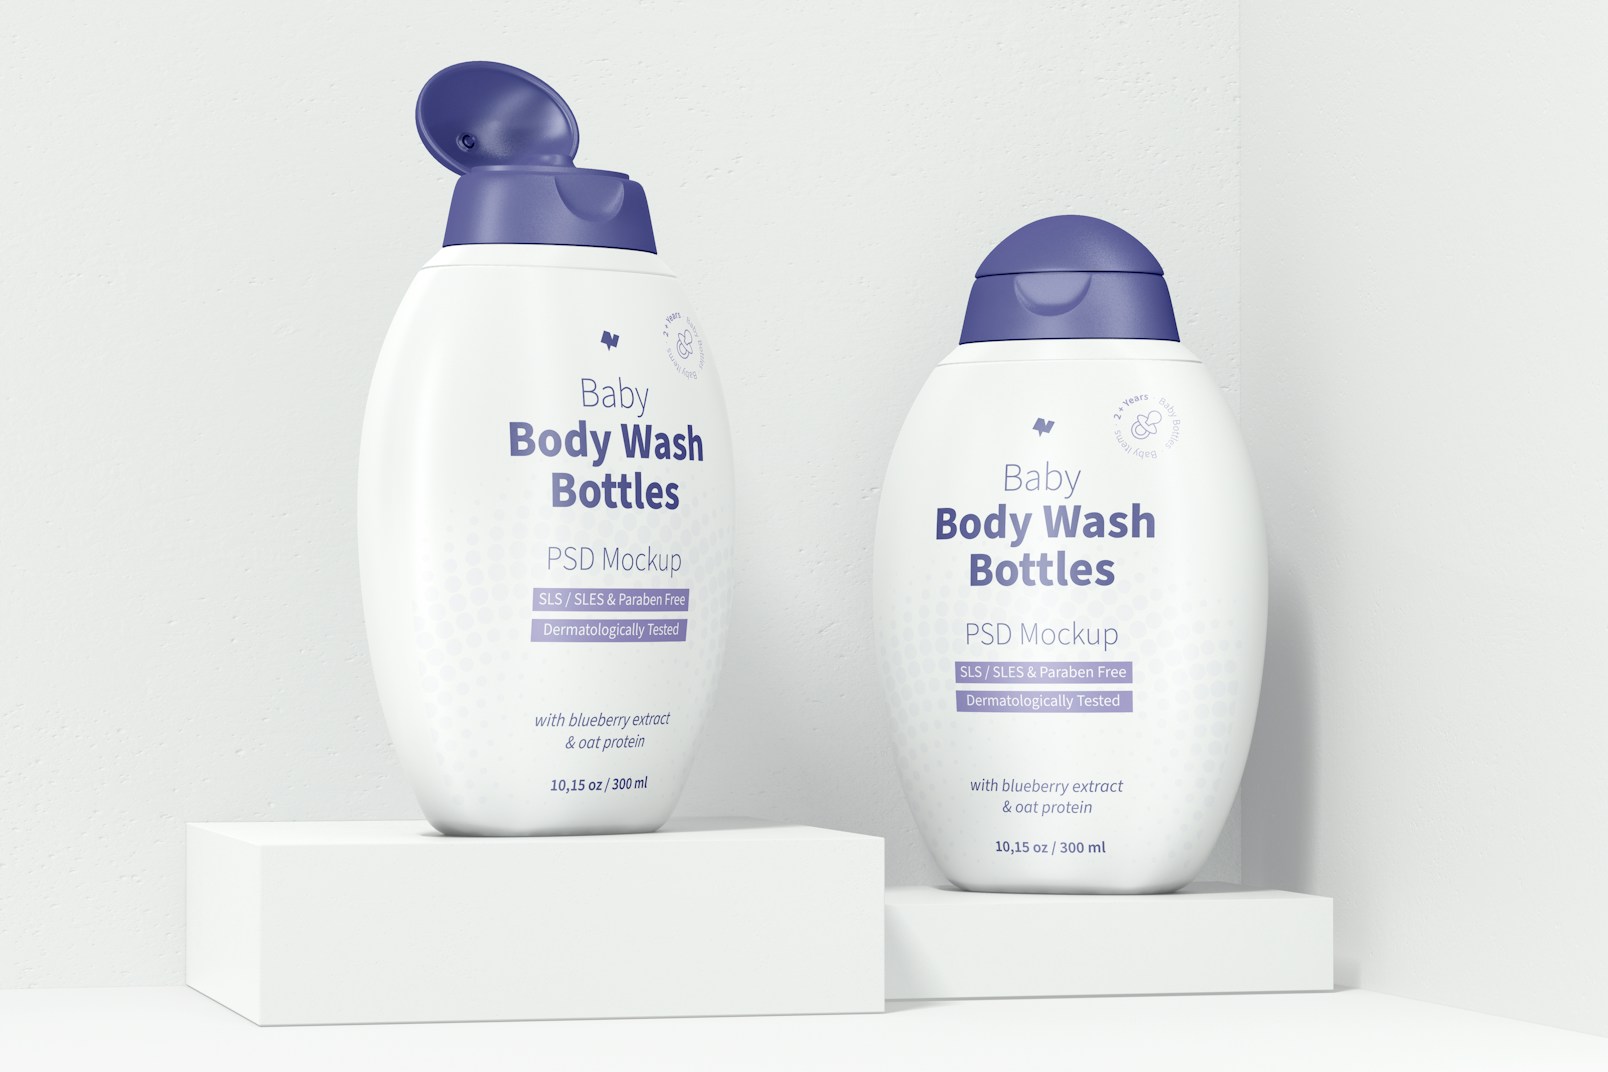 Baby Body Wash Bottles Mockup, Opened and Closed